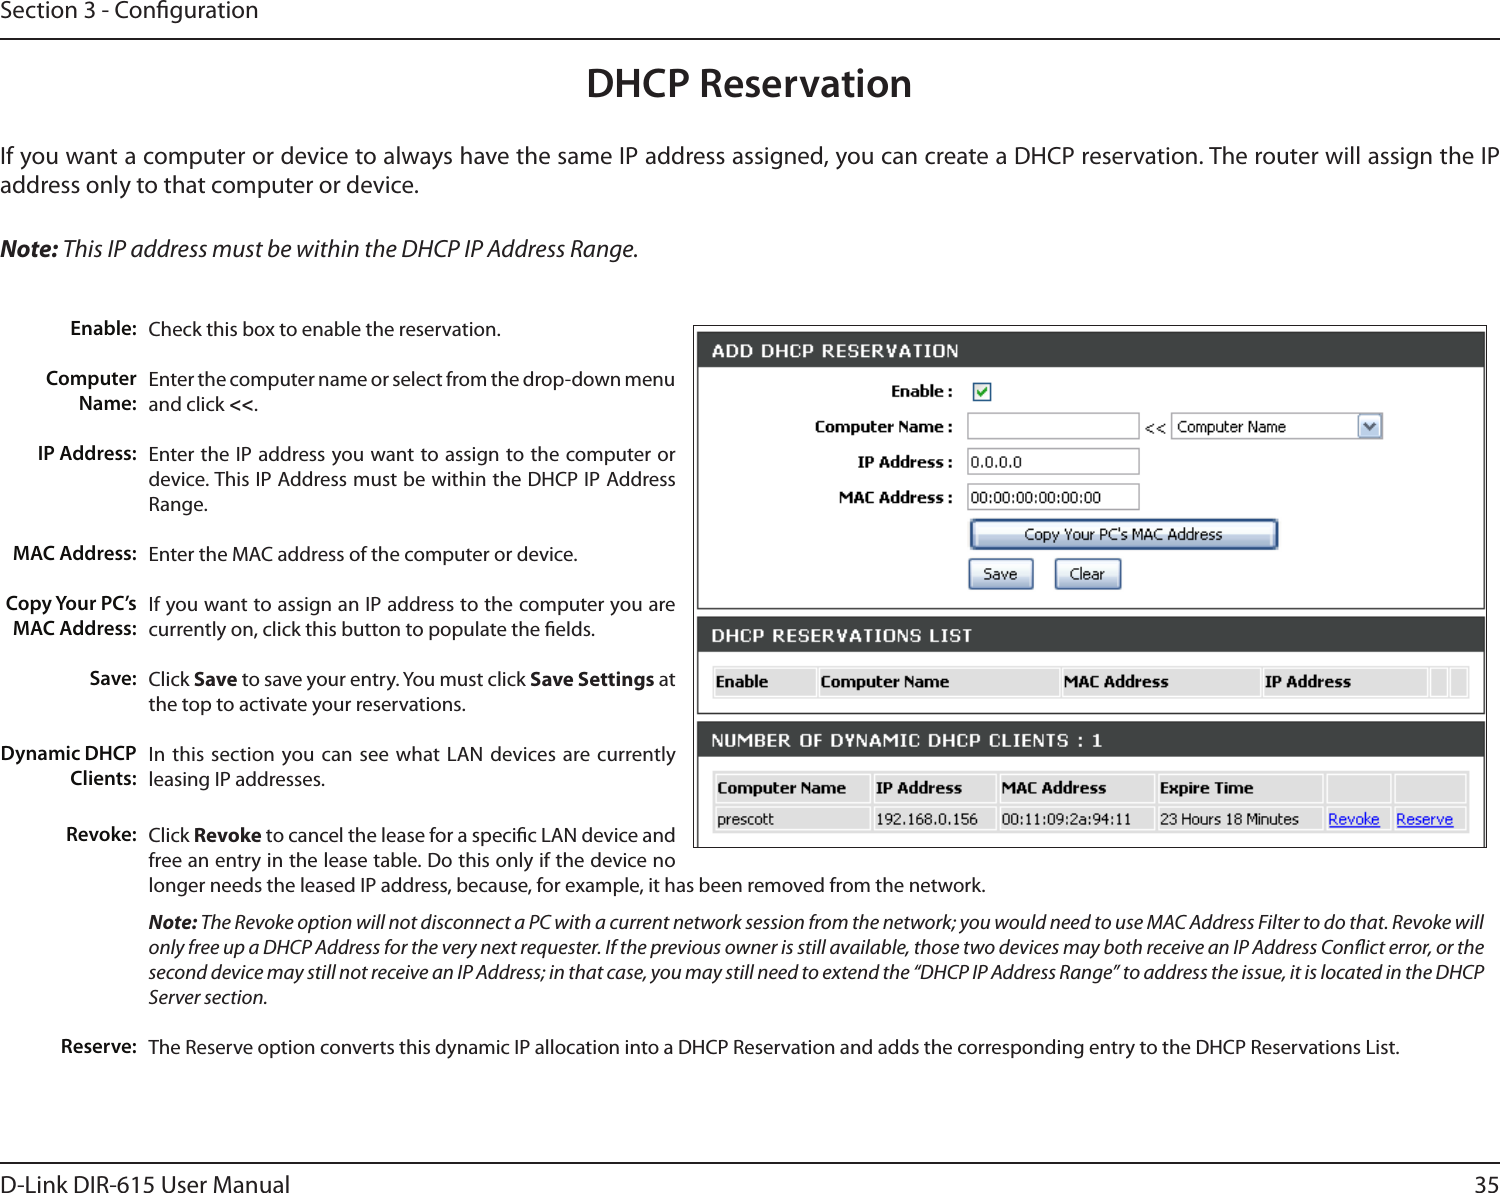 35D-Link DIR-615 User ManualSection 3 - CongurationDHCP ReservationIf you want a computer or device to always have the same IP address assigned, you can create a DHCP reservation. The router will assign the IP address only to that computer or device. Note: This IP address must be within the DHCP IP Address Range.Check this box to enable the reservation.Enter the computer name or select from the drop-down menu and click &lt;&lt;.Enter the IP address you want to assign to the computer or device. This IP Address must be within the DHCP IP Address Range.Enter the MAC address of the computer or device.If you want to assign an IP address to the computer you are currently on, click this button to populate the elds. Click Save to save your entry. You must click Save Settings at the top to activate your reservations. In this  section you can see what LAN devices are currently leasing IP addresses.Click Revoke to cancel the lease for a specic LAN device and free an entry in the lease table. Do this only if the device no longer needs the leased IP address, because, for example, it has been removed from the network.Note: The Revoke option will not disconnect a PC with a current network session from the network; you would need to use MAC Address Filter to do that. Revoke will only free up a DHCP Address for the very next requester. If the previous owner is still available, those two devices may both receive an IP Address Conict error, or the second device may still not receive an IP Address; in that case, you may still need to extend the “DHCP IP Address Range” to address the issue, it is located in the DHCP Server section.  The Reserve option converts this dynamic IP allocation into a DHCP Reservation and adds the corresponding entry to the DHCP Reservations List.Enable:Computer Name:IP Address:MAC Address:Copy Your PC’s MAC Address:Save:Dynamic DHCP Clients:Revoke:Reserve: